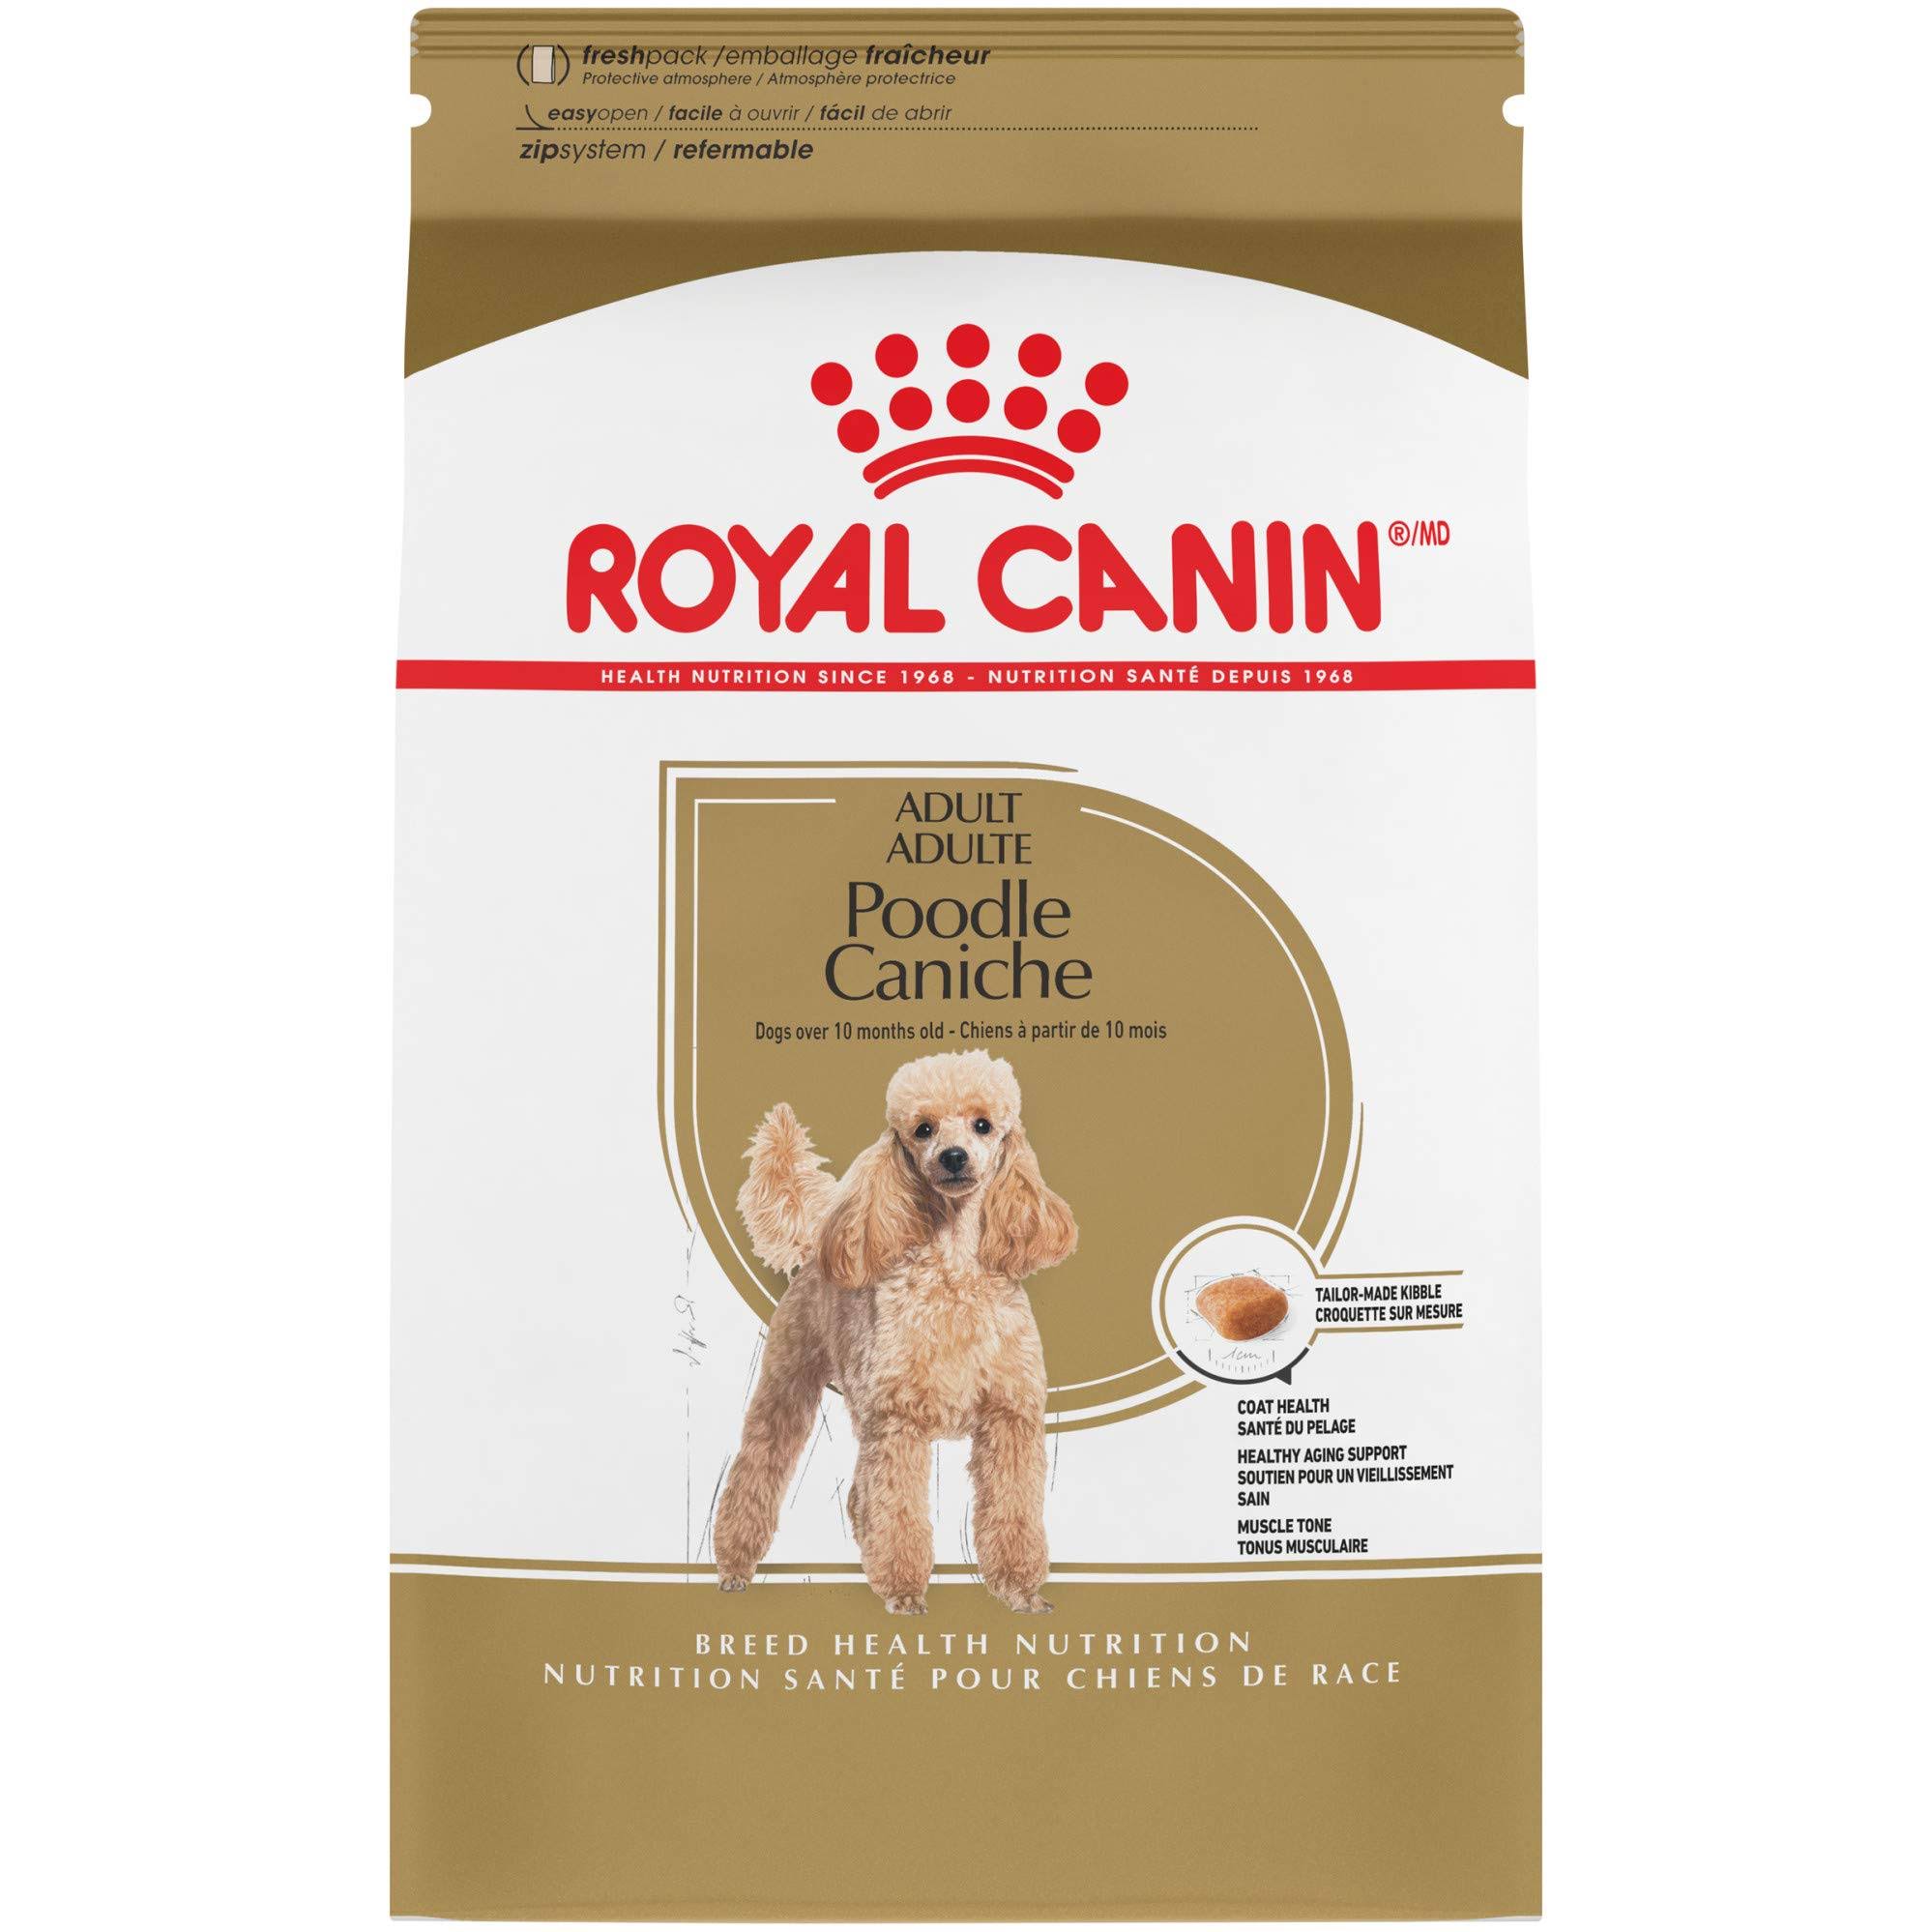 Royal Canin Poodle Dry Adult Dog Food - 10lbs